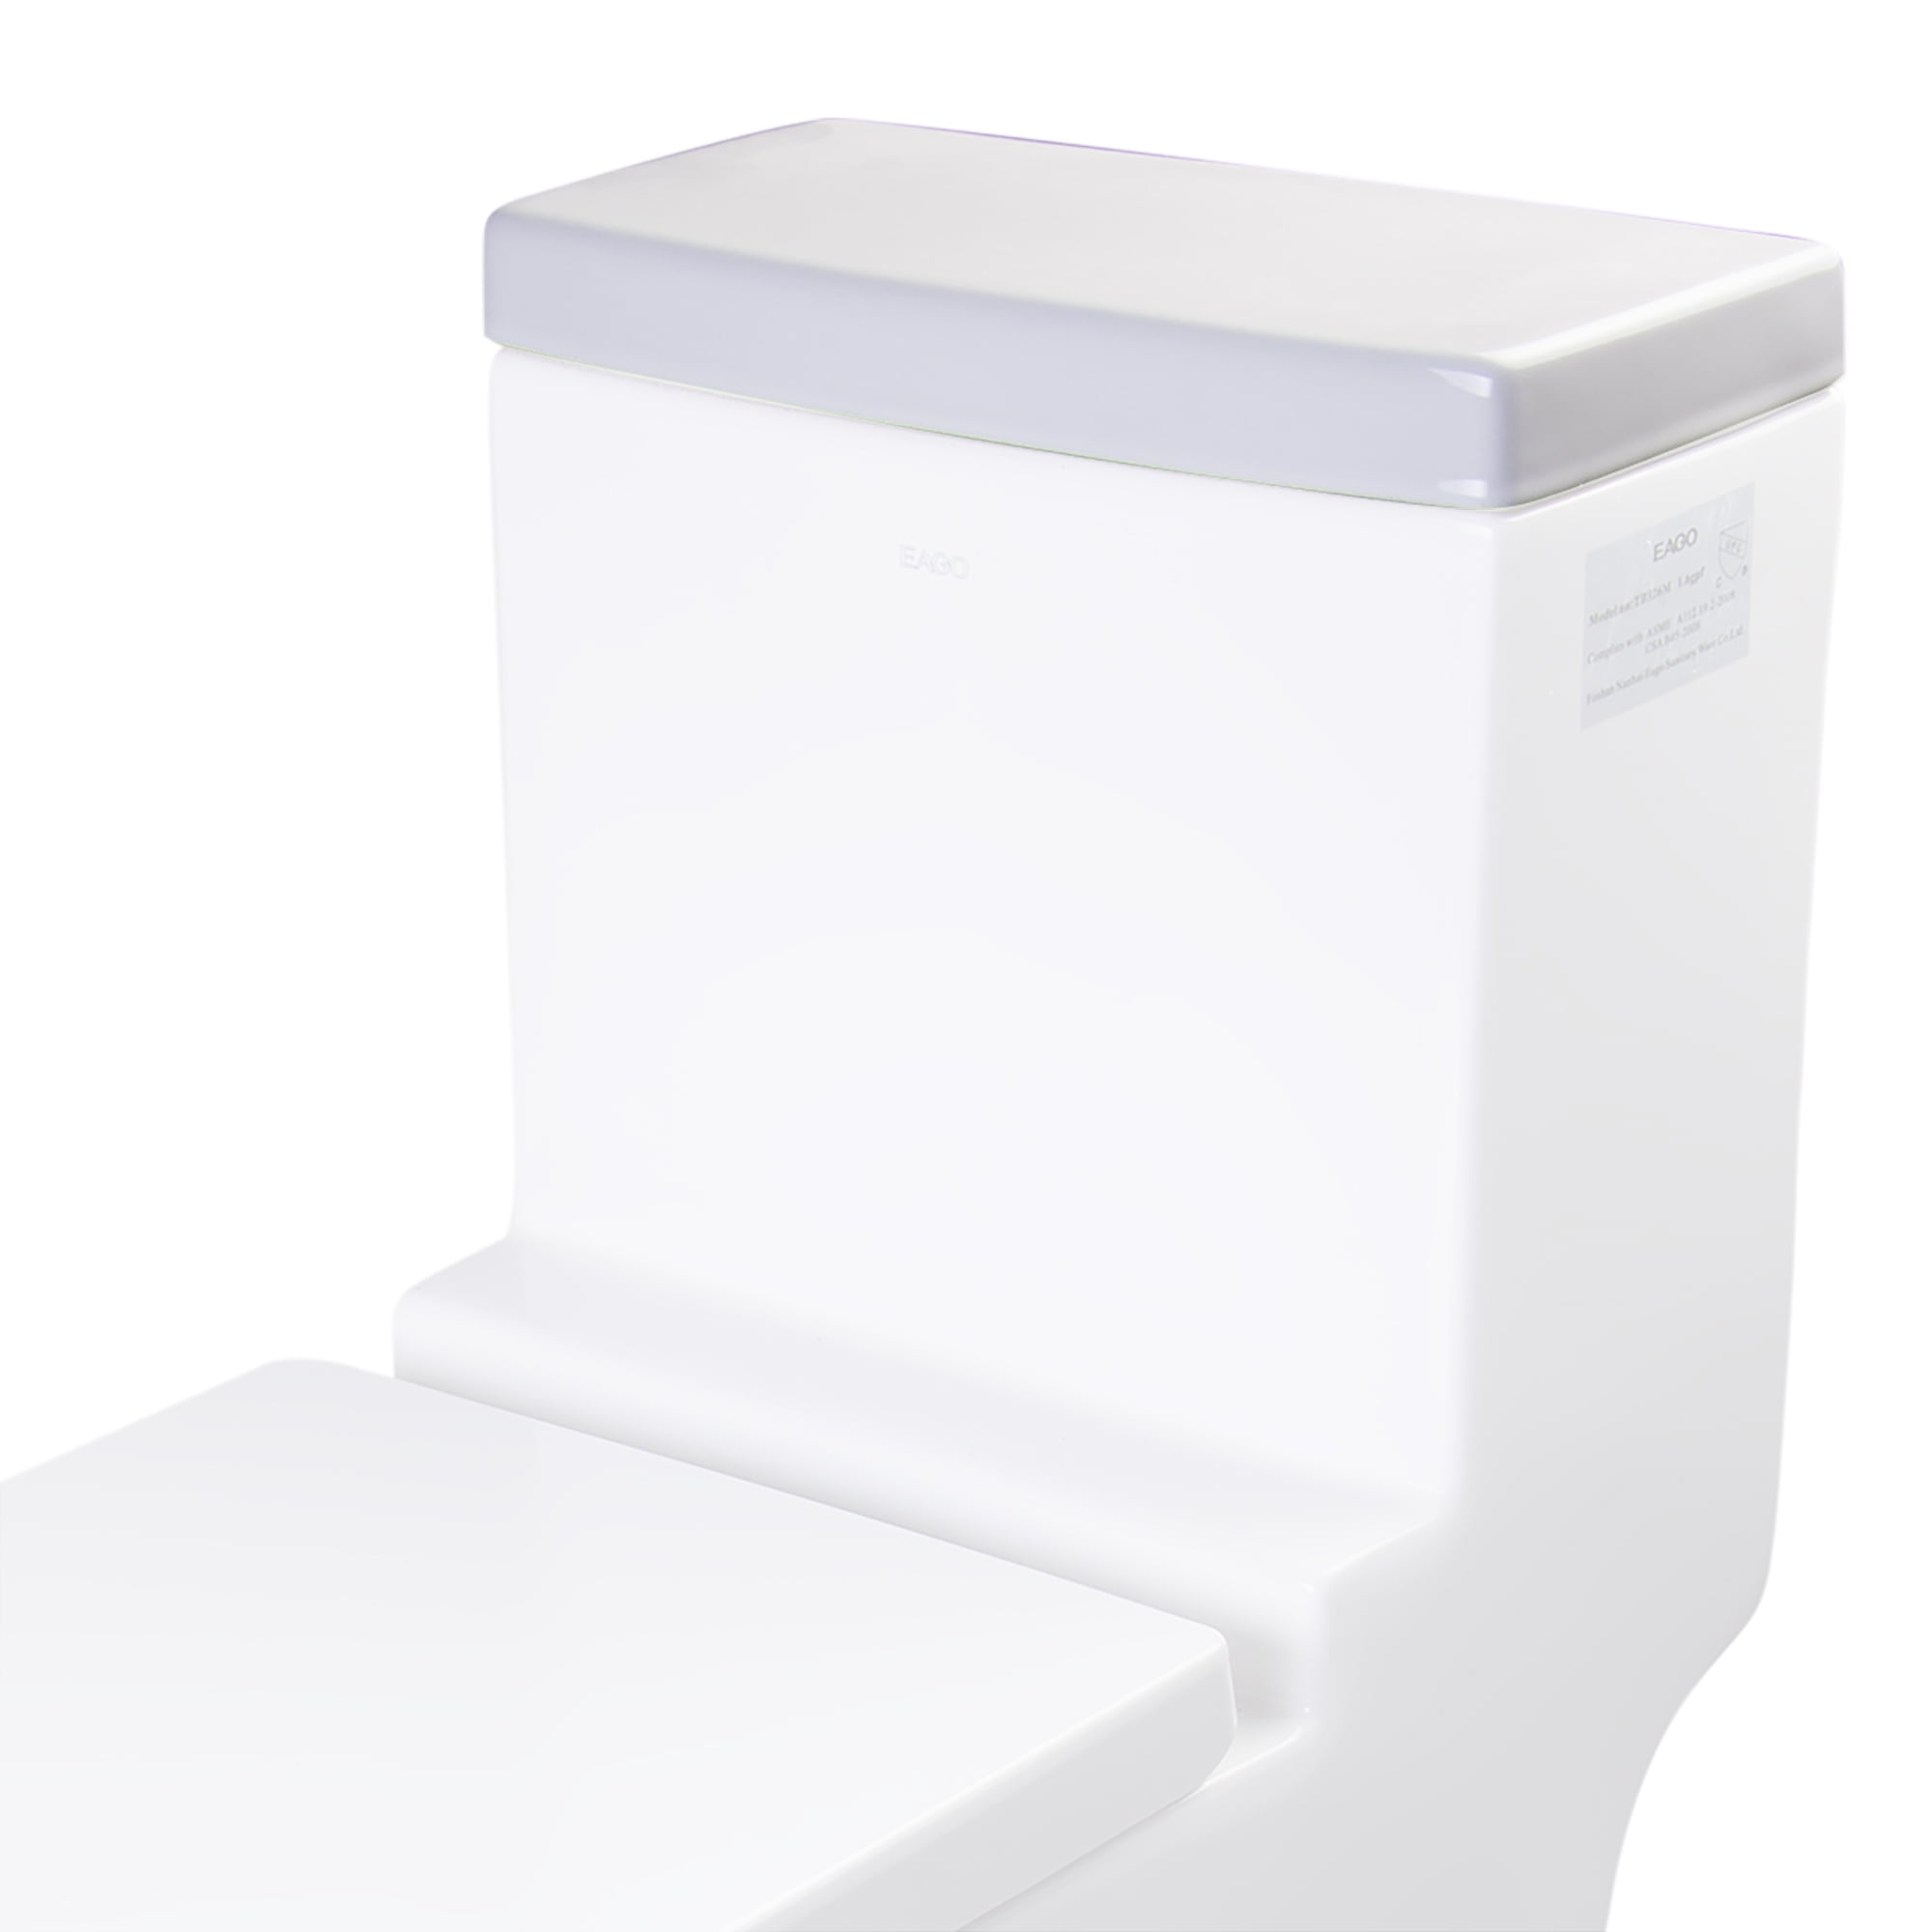 R-326lid Replacement Ceramic Toilet Lid, White For Tb326